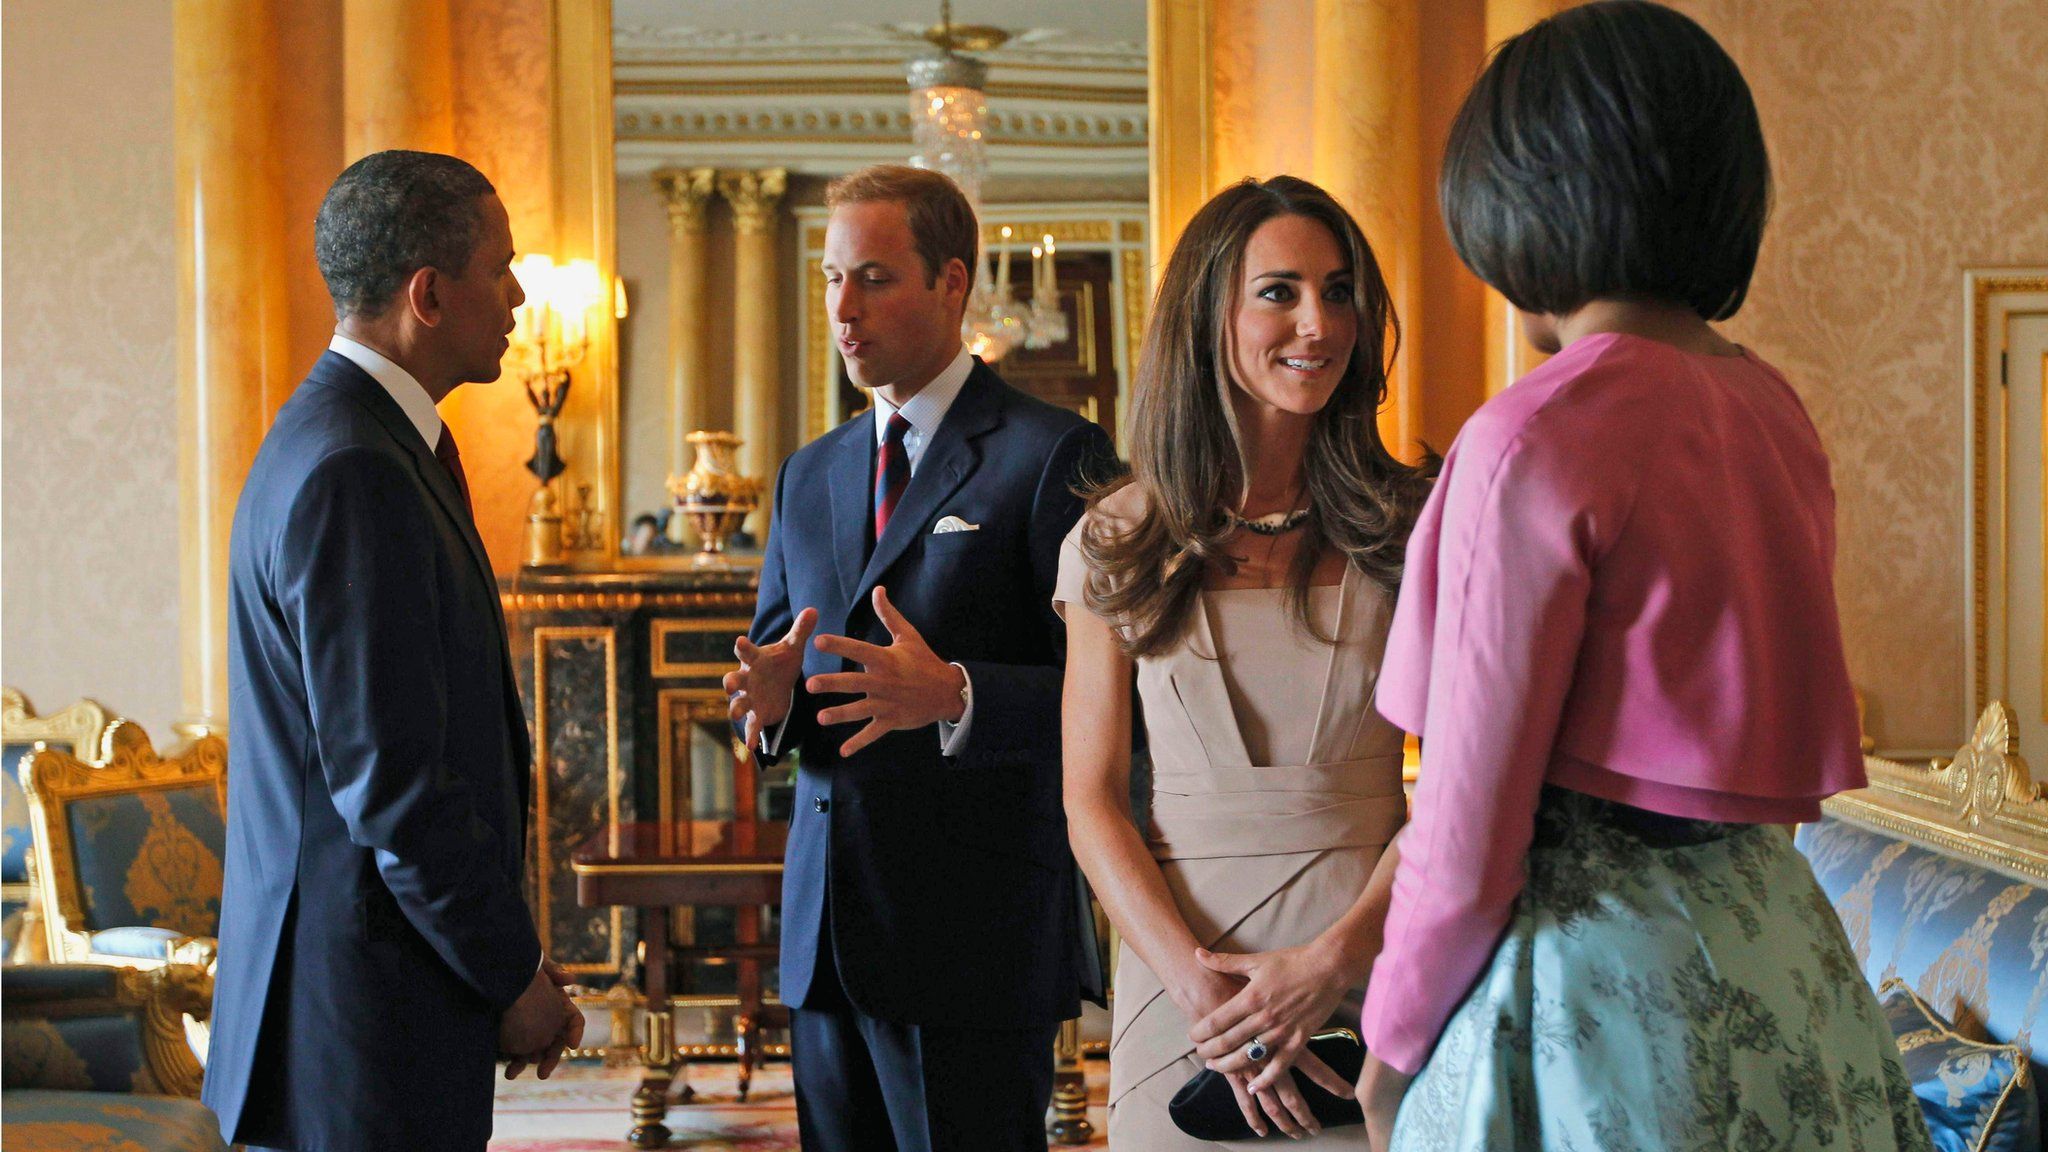 US President Barack Obama and First Lady Michelle Obama meet Prince William and the Duchess of Cambridge at Buckingham Palace in 2011.